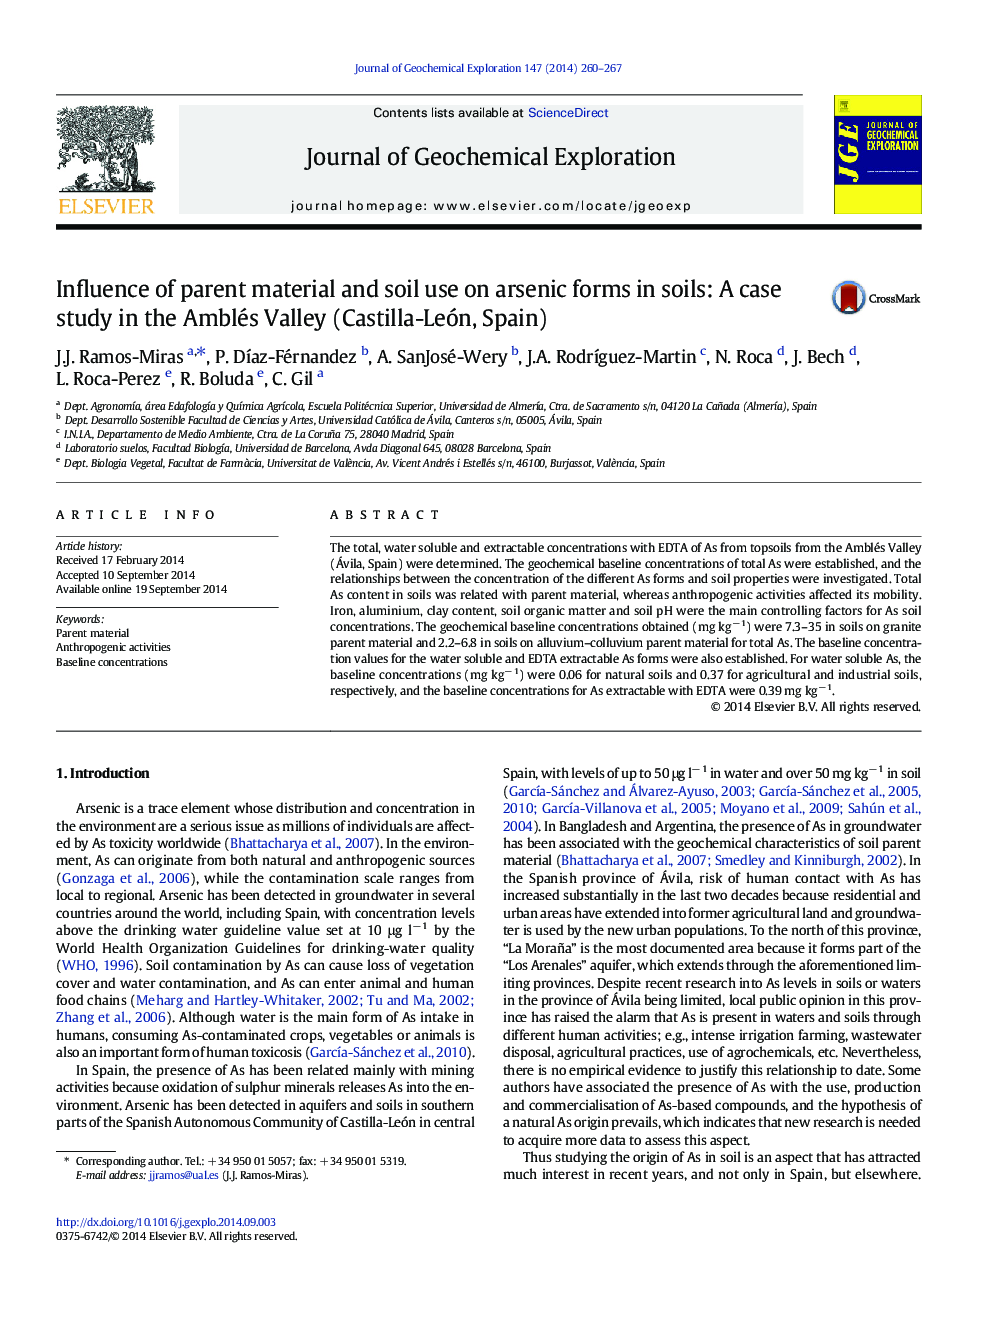 Influence of parent material and soil use on arsenic forms in soils: A case study in the Amblés Valley (Castilla-León, Spain)